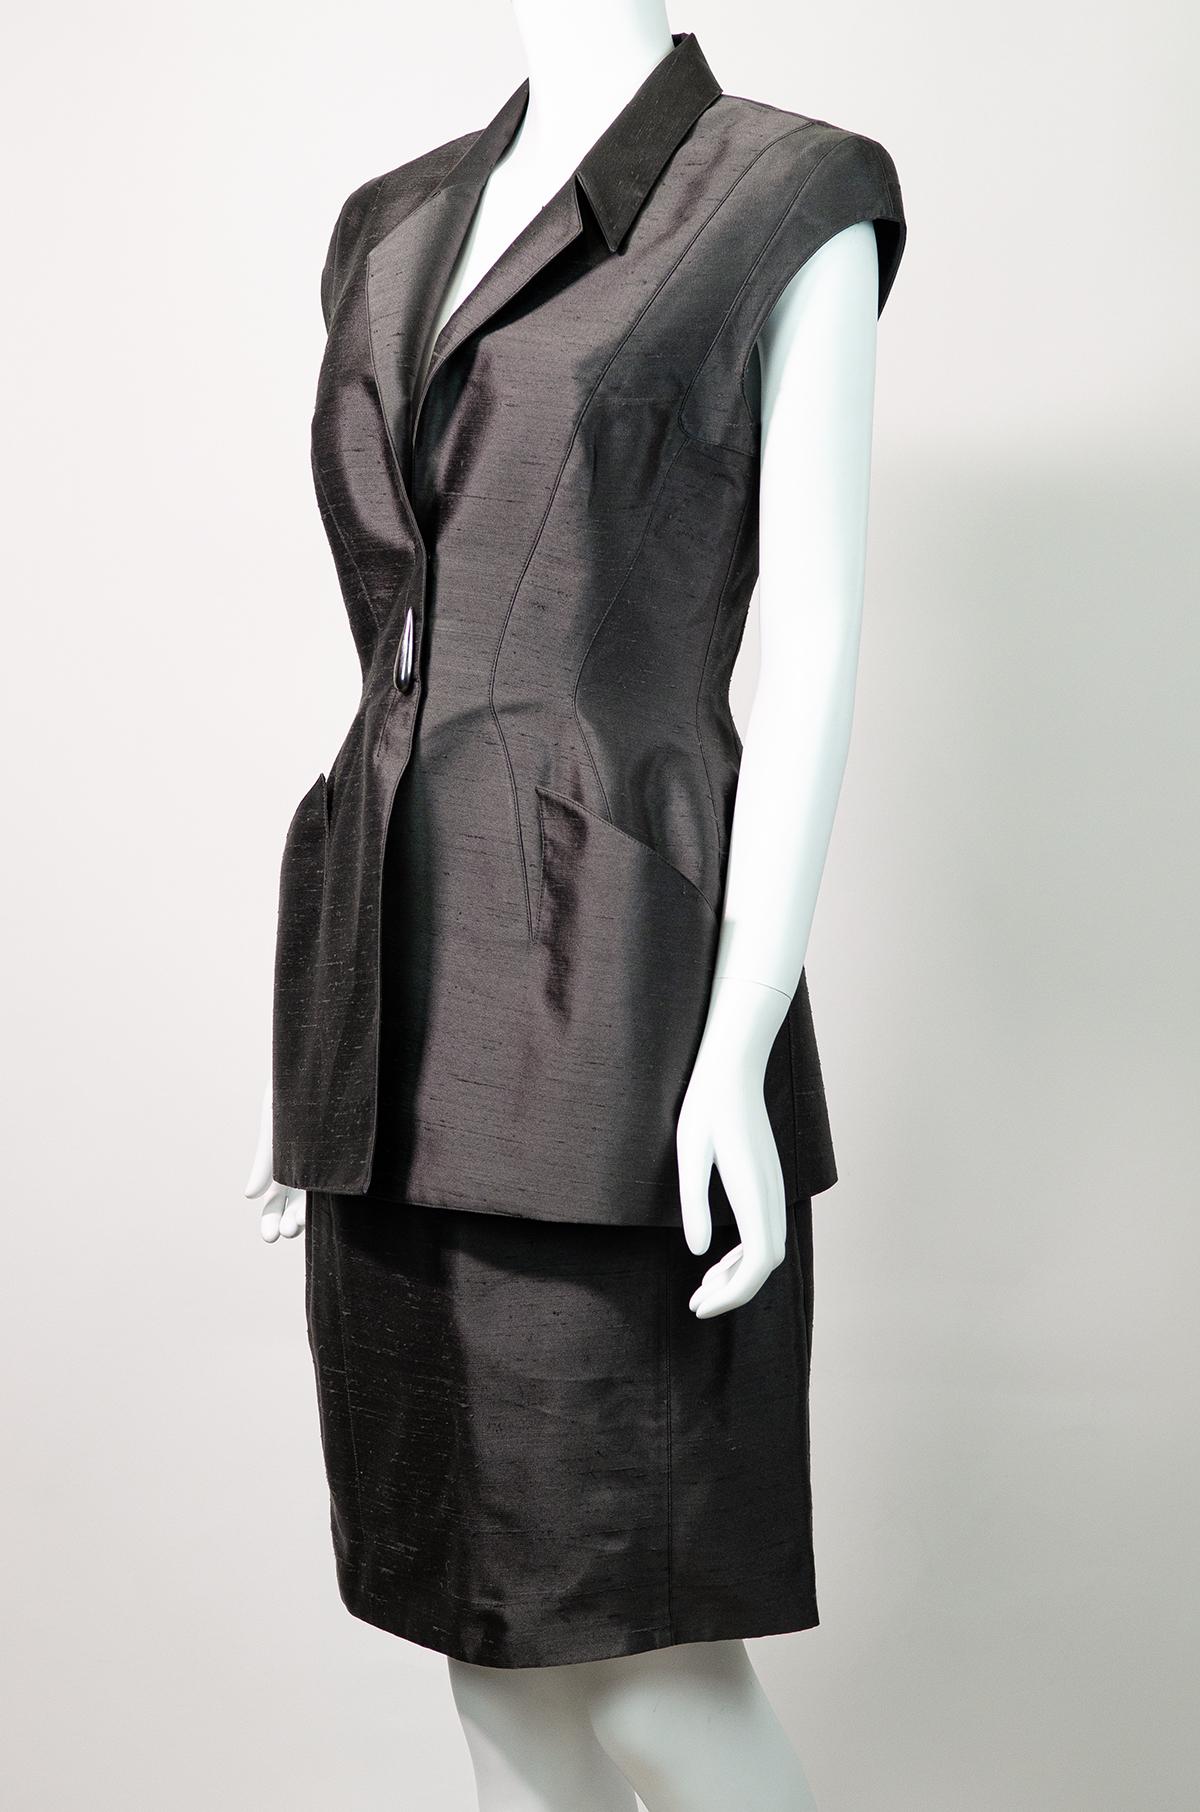 Breathtaking vintage Thierry Mugler cap sleeved silk suit, with an ultimate chic futuristic feel.

This gunmetal grey two-piece suit is made from a beautiful textured silk. Tailored so beautifully in classic Thierry Mugler style - it features wide